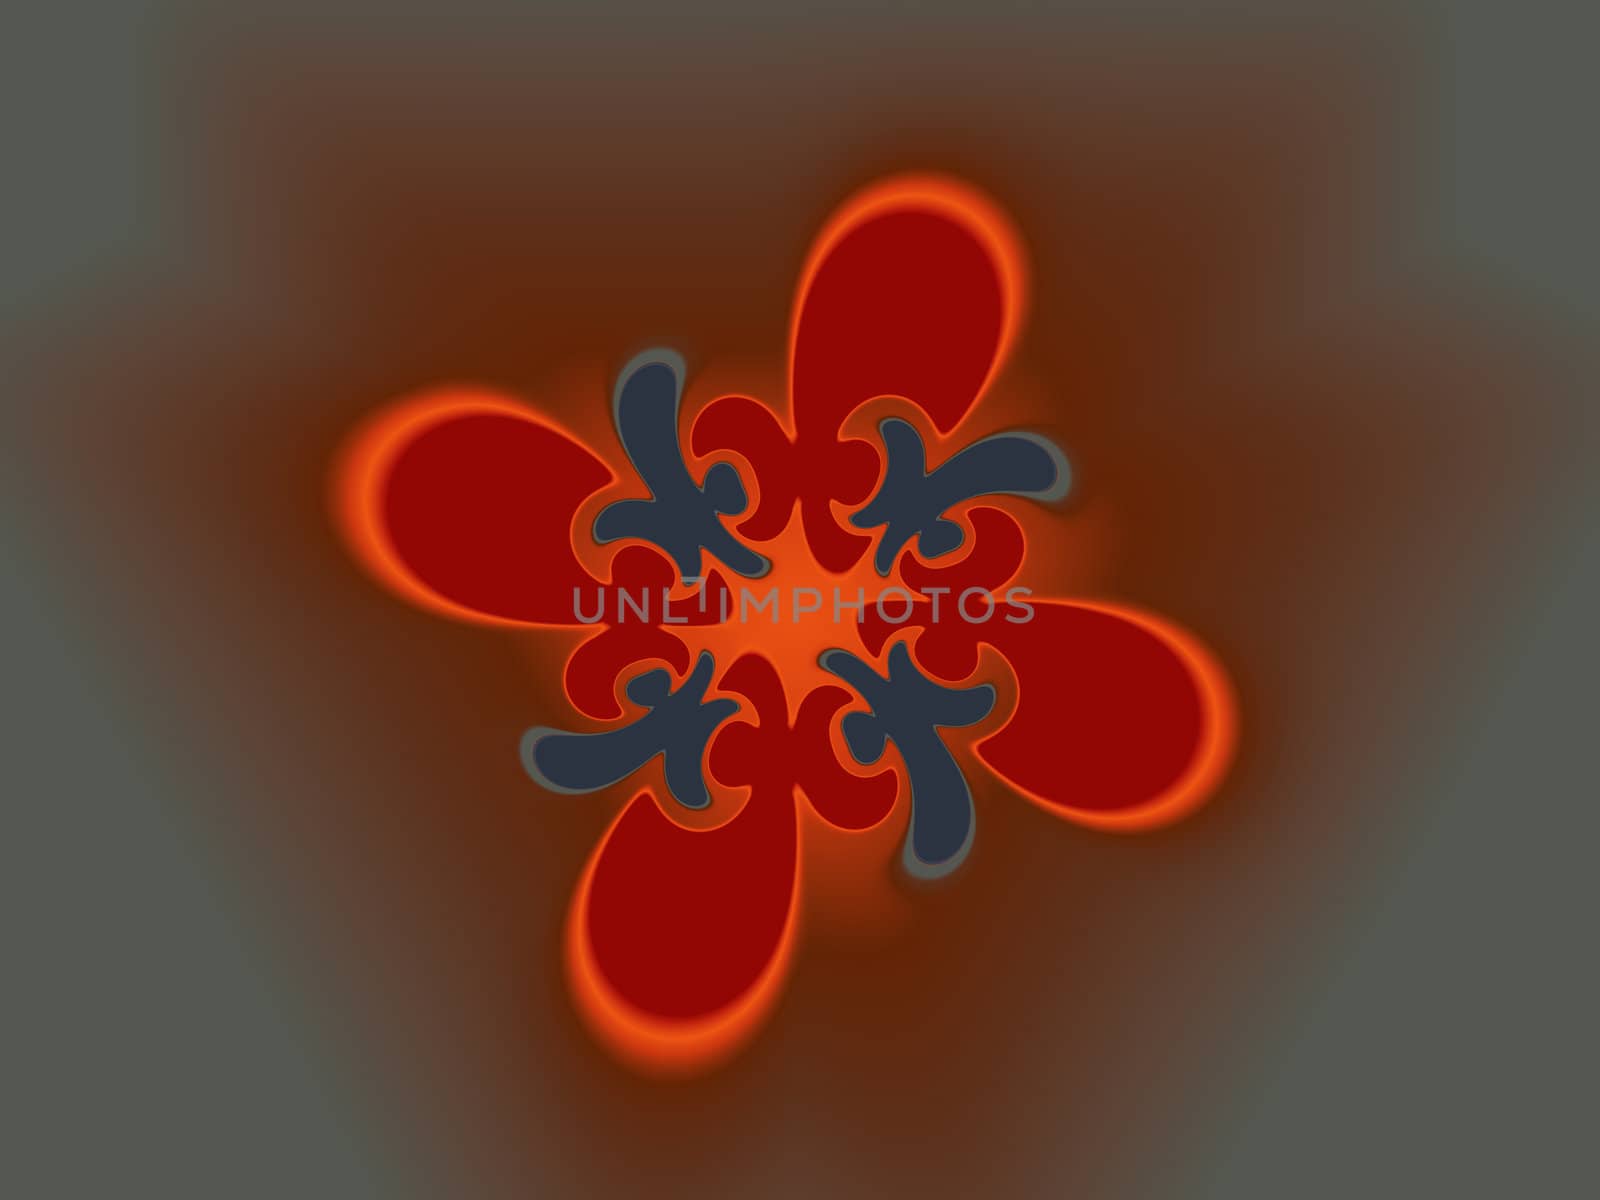 An abstract illustration with a central design of four divisions done in oranges and grays.